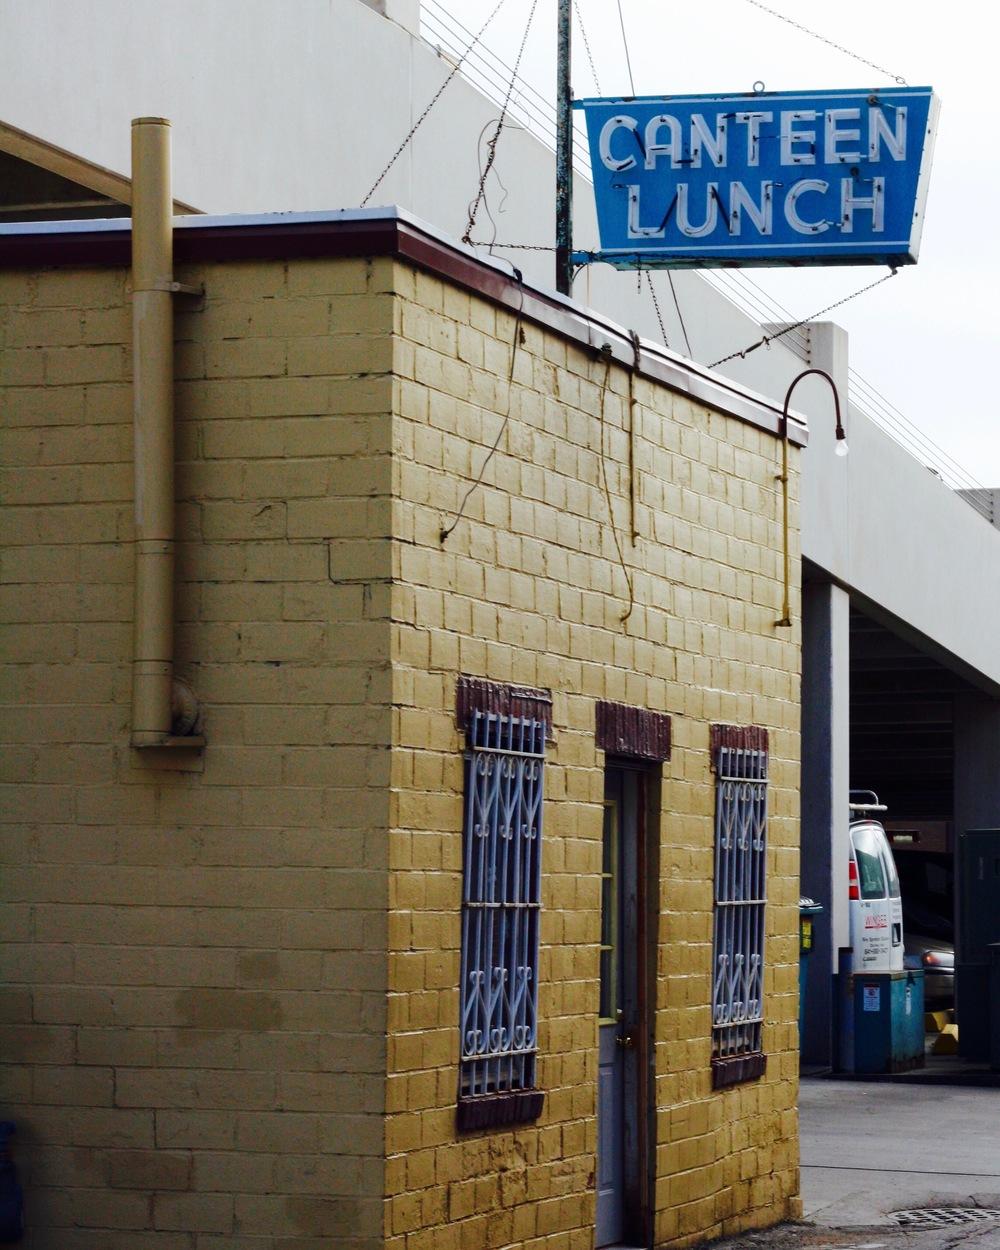 Pet Friendly Canteen Lunch in the Alley